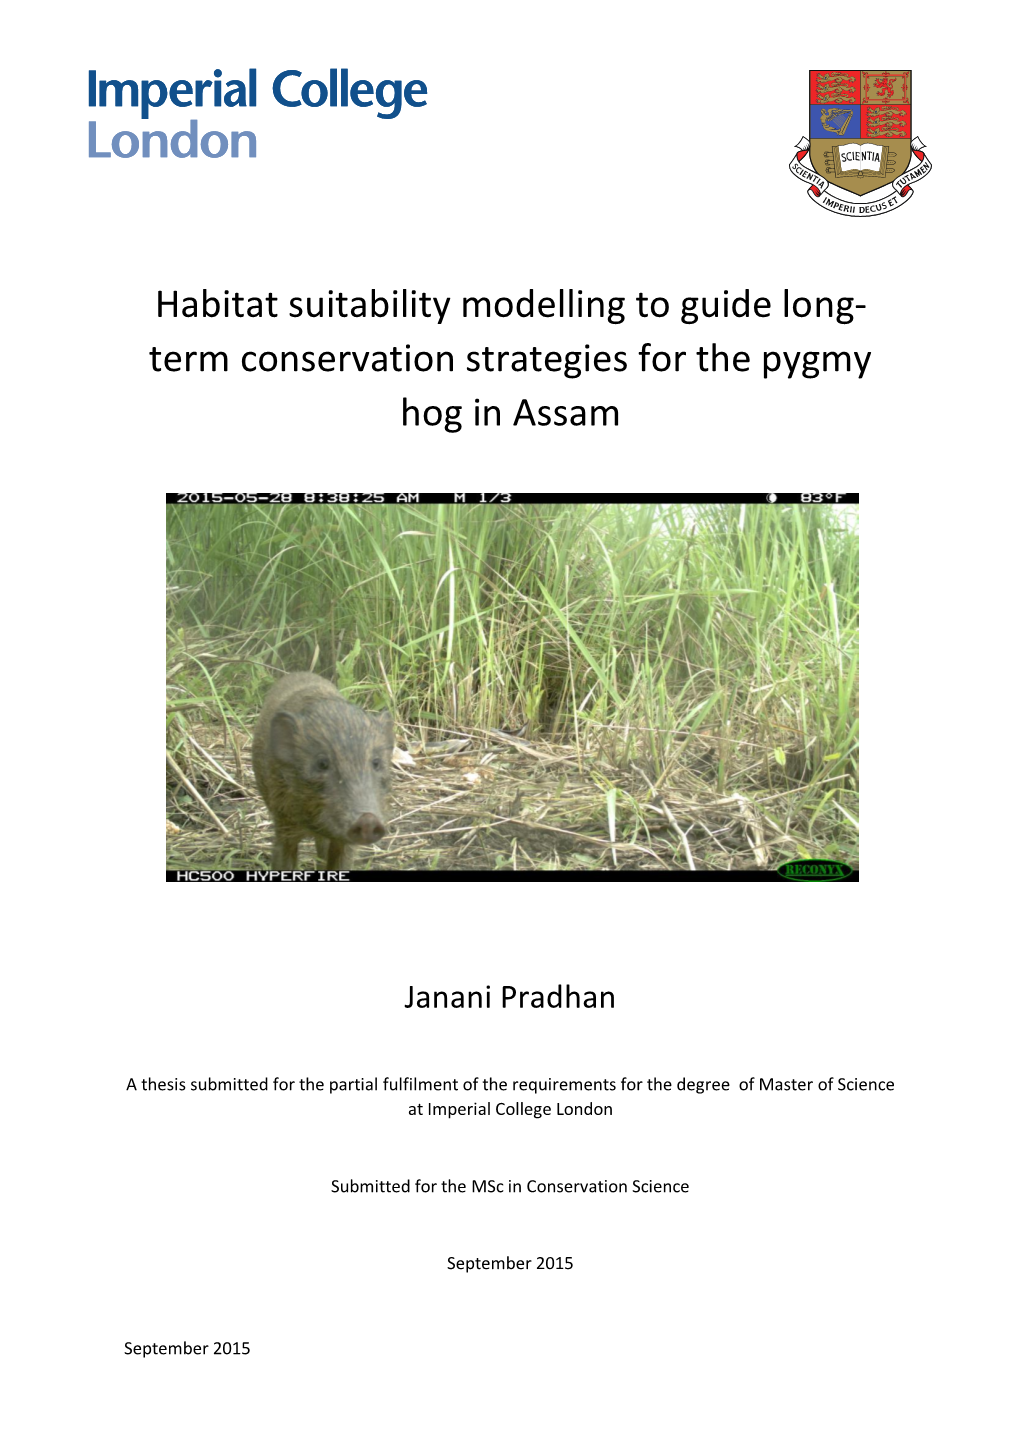 Habitat Suitability Modelling to Guide Long- Term Conservation Strategies for the Pygmy Hog in Assam